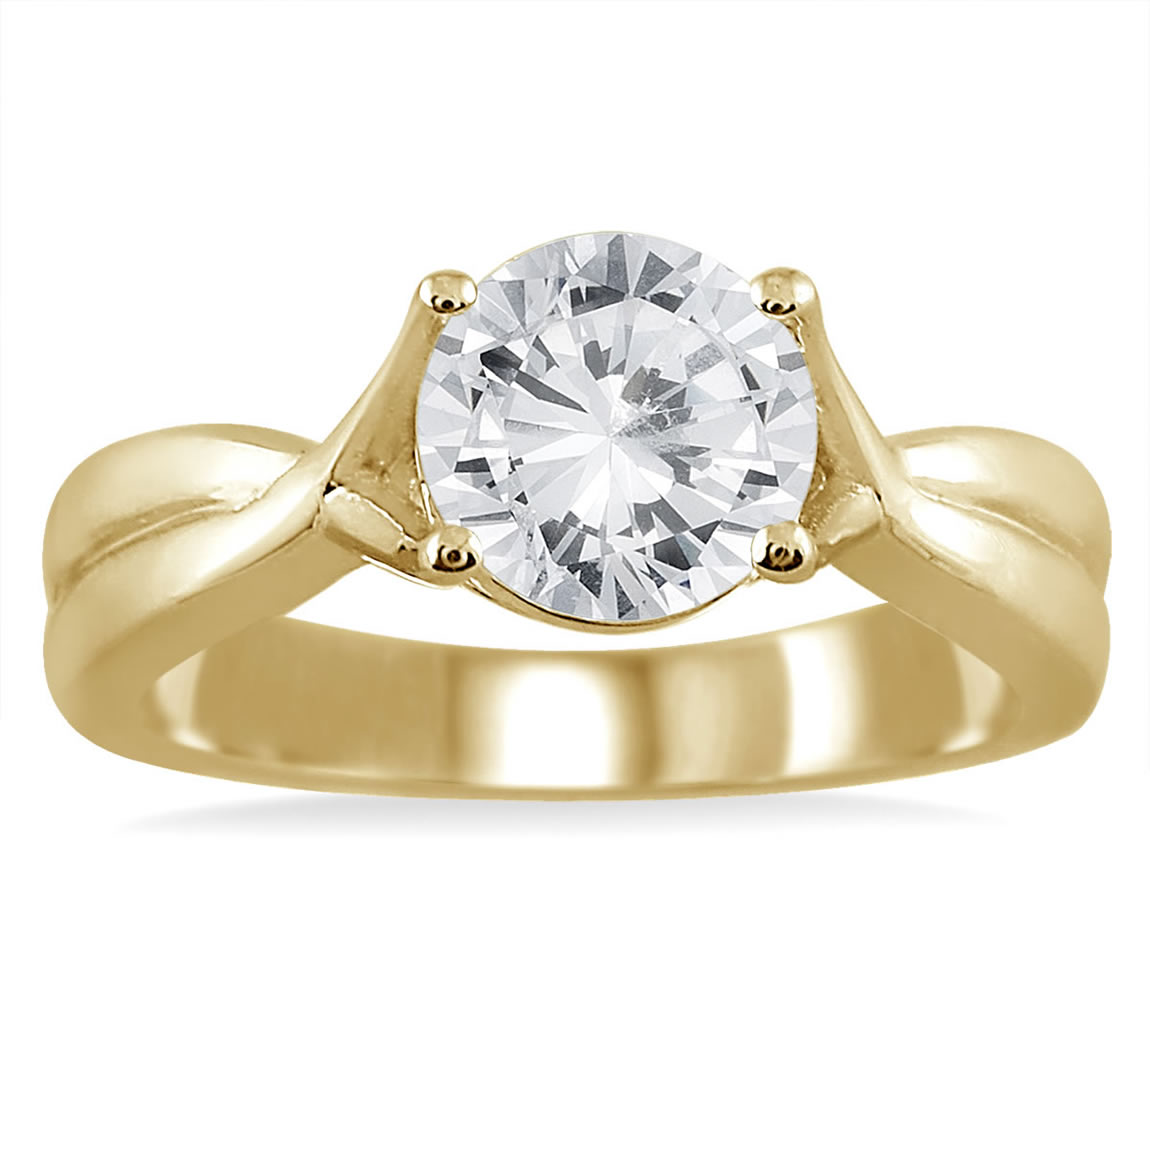 AGS Certified 1 Carat Diamond Solitaire Ring in 14K Yellow Gold (H-I Color, I2-I3 Clarity)